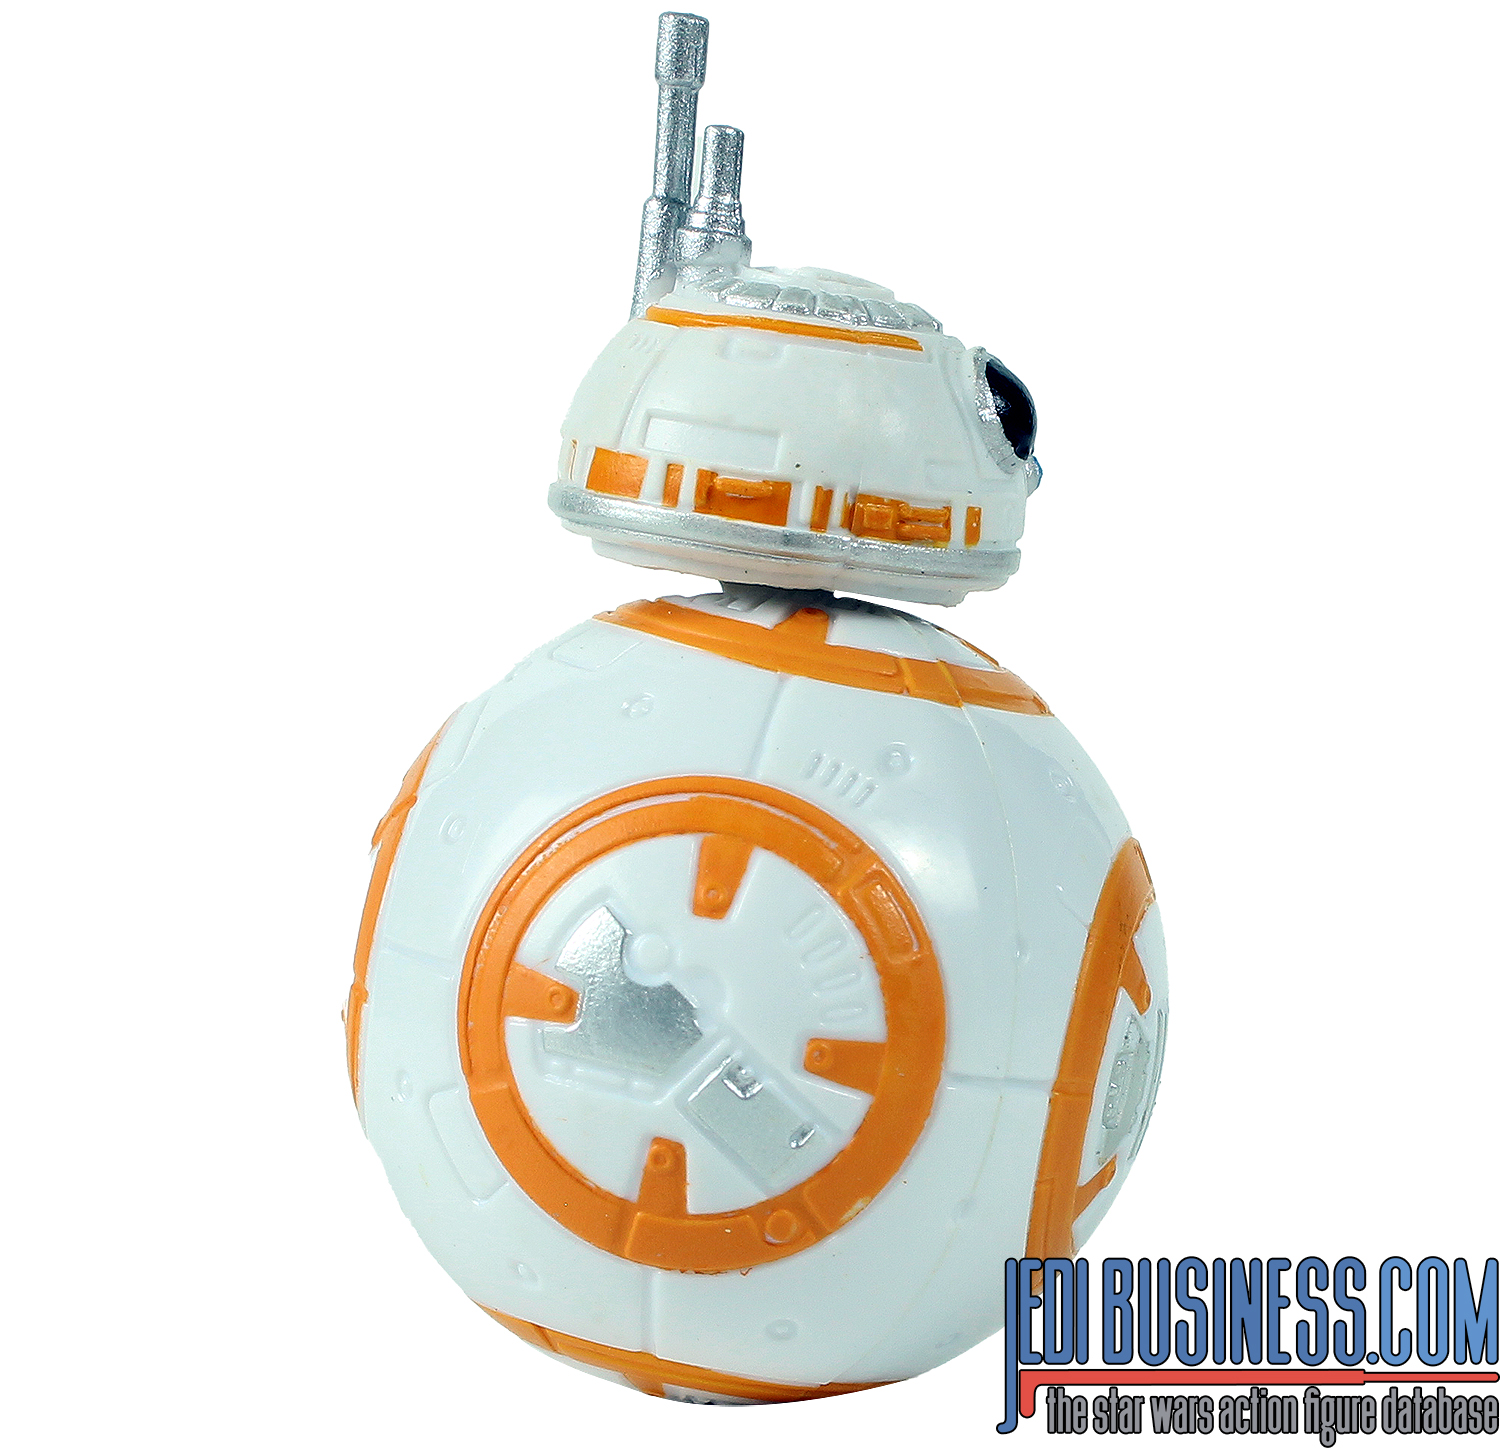 BB-8 Resistance 6-Pack